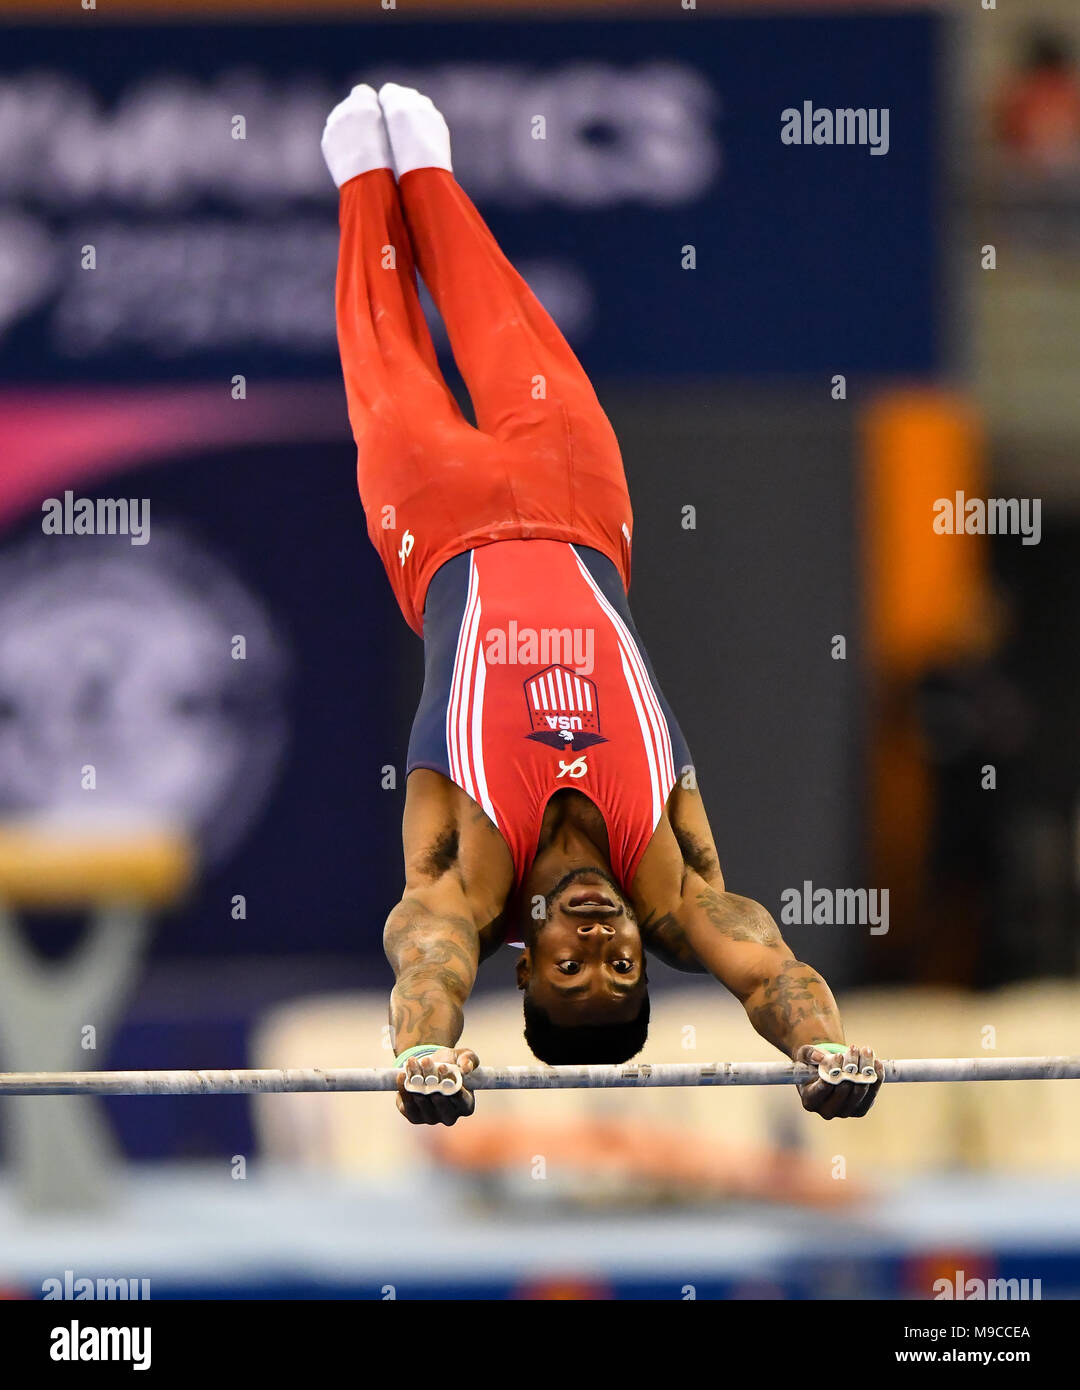 Doha, Capital of Qatar. 24th Mar, 2018. Marvin Kimble of the United States competes during the Men's Horizontal Bar final at the 11th FIG Artistic Gymnastics Individual Apparatus World Cup in Doha, Capital of Qatar, on March 24, 2018. Marvin Kimble took the silver with 14.533 points. Credit: Nikku/Xinhua/Alamy Live News Stock Photo